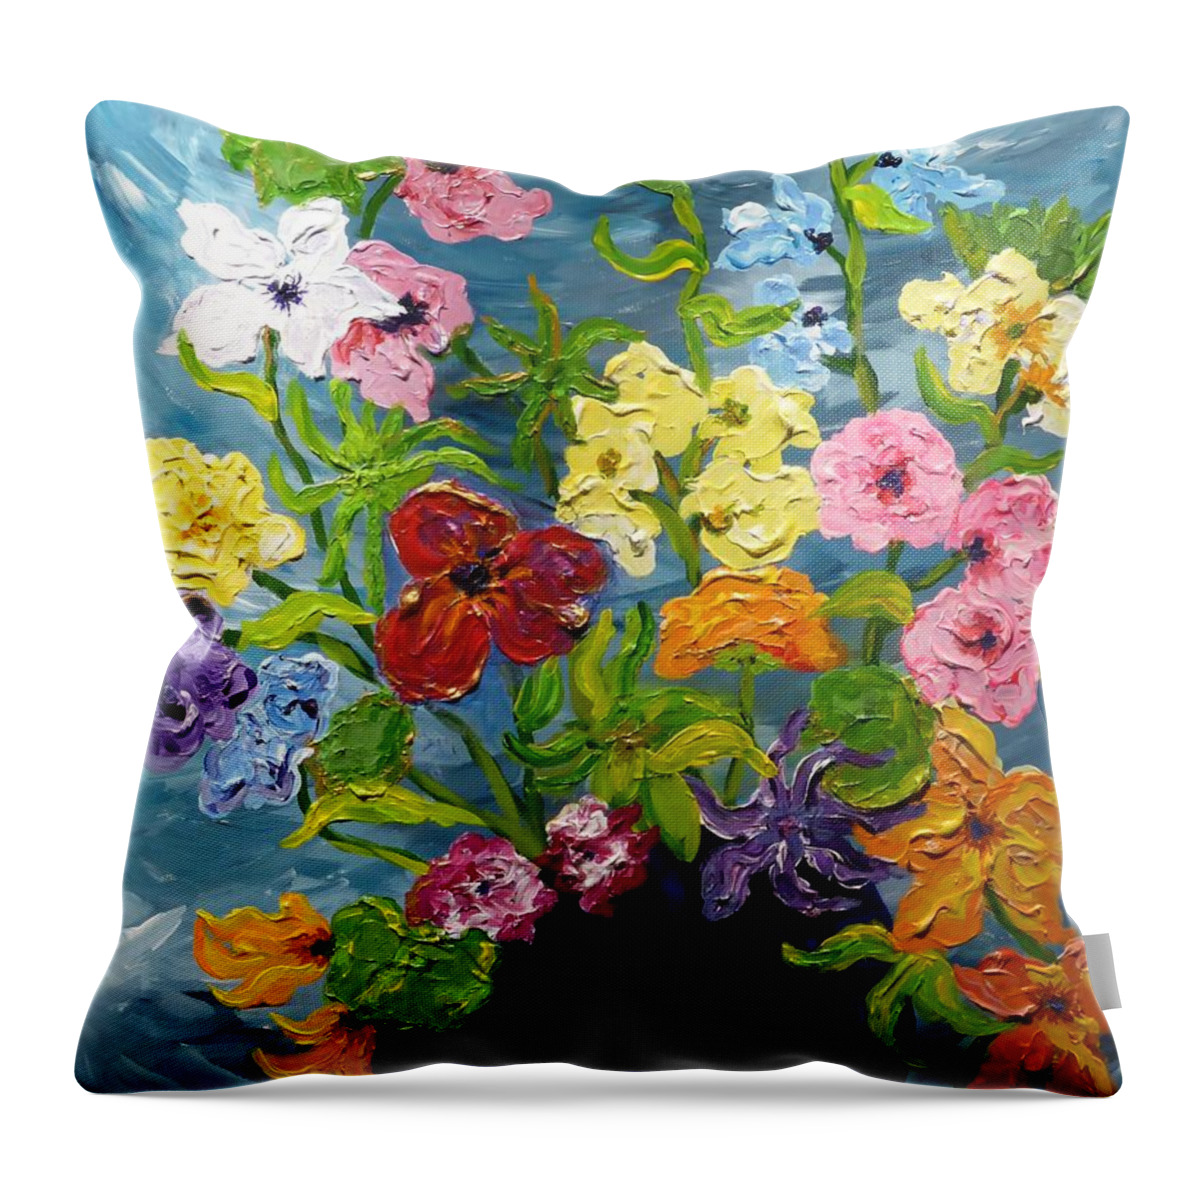 Floral Throw Pillow featuring the painting Flower Power by Diane Arlitt